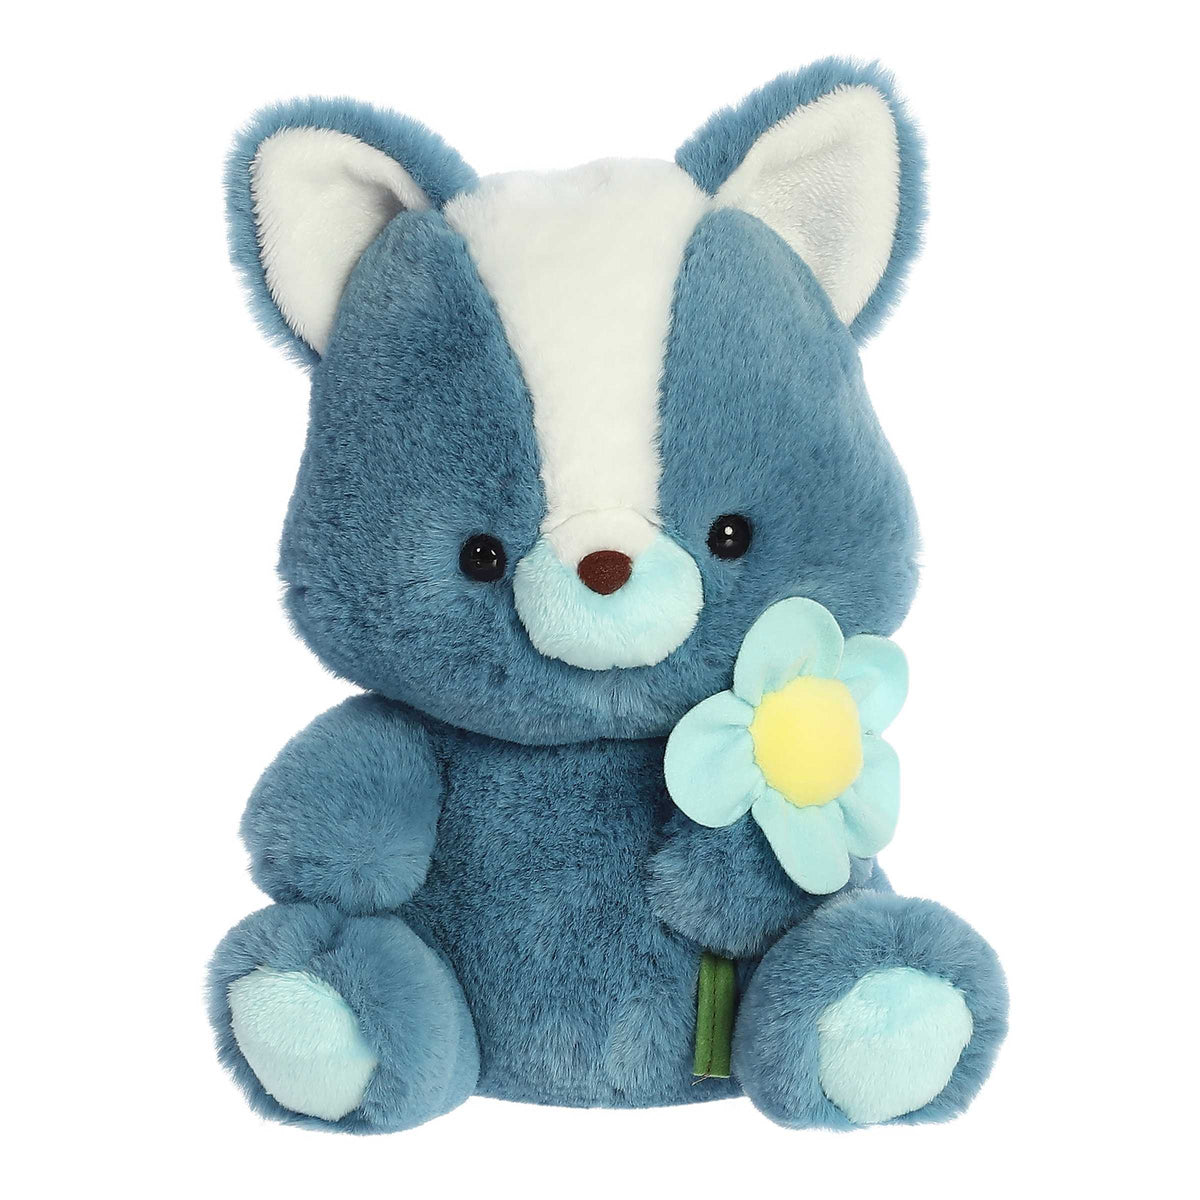 Woodland Friends Skunk plush from Aurora's Spring Collection, with plush blue fur and holding a charming blue daisy